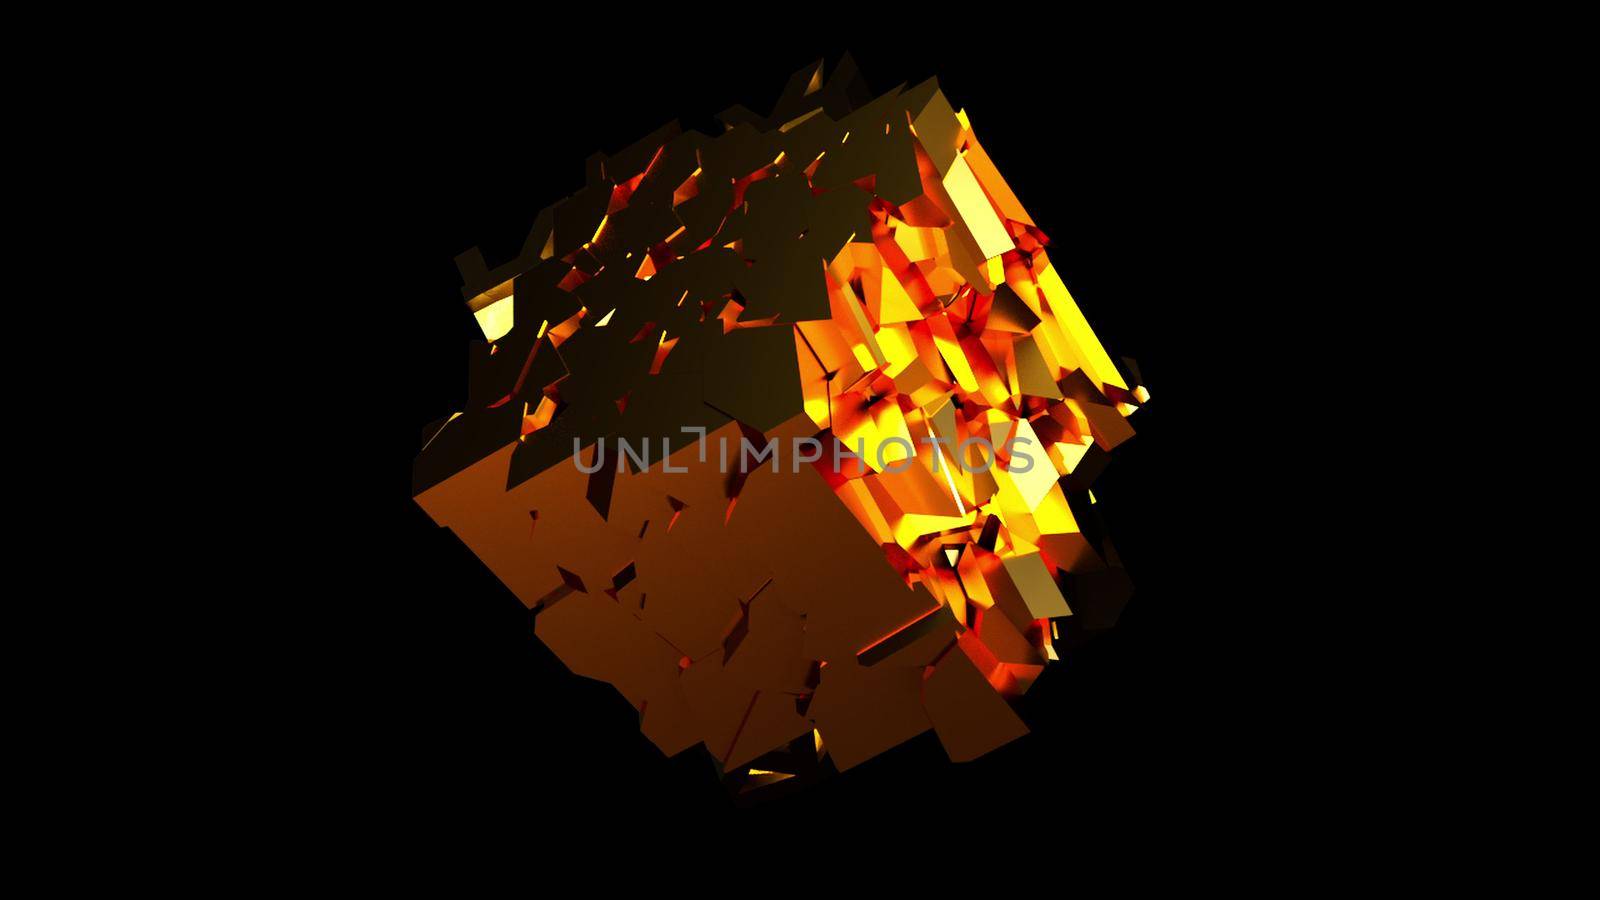 Futuristic breaking 3d render square into small geometric fragments. Changing cybercrystal with decaying textures. Cubic plasmoid cracked from gravity with creative decoration pieces.